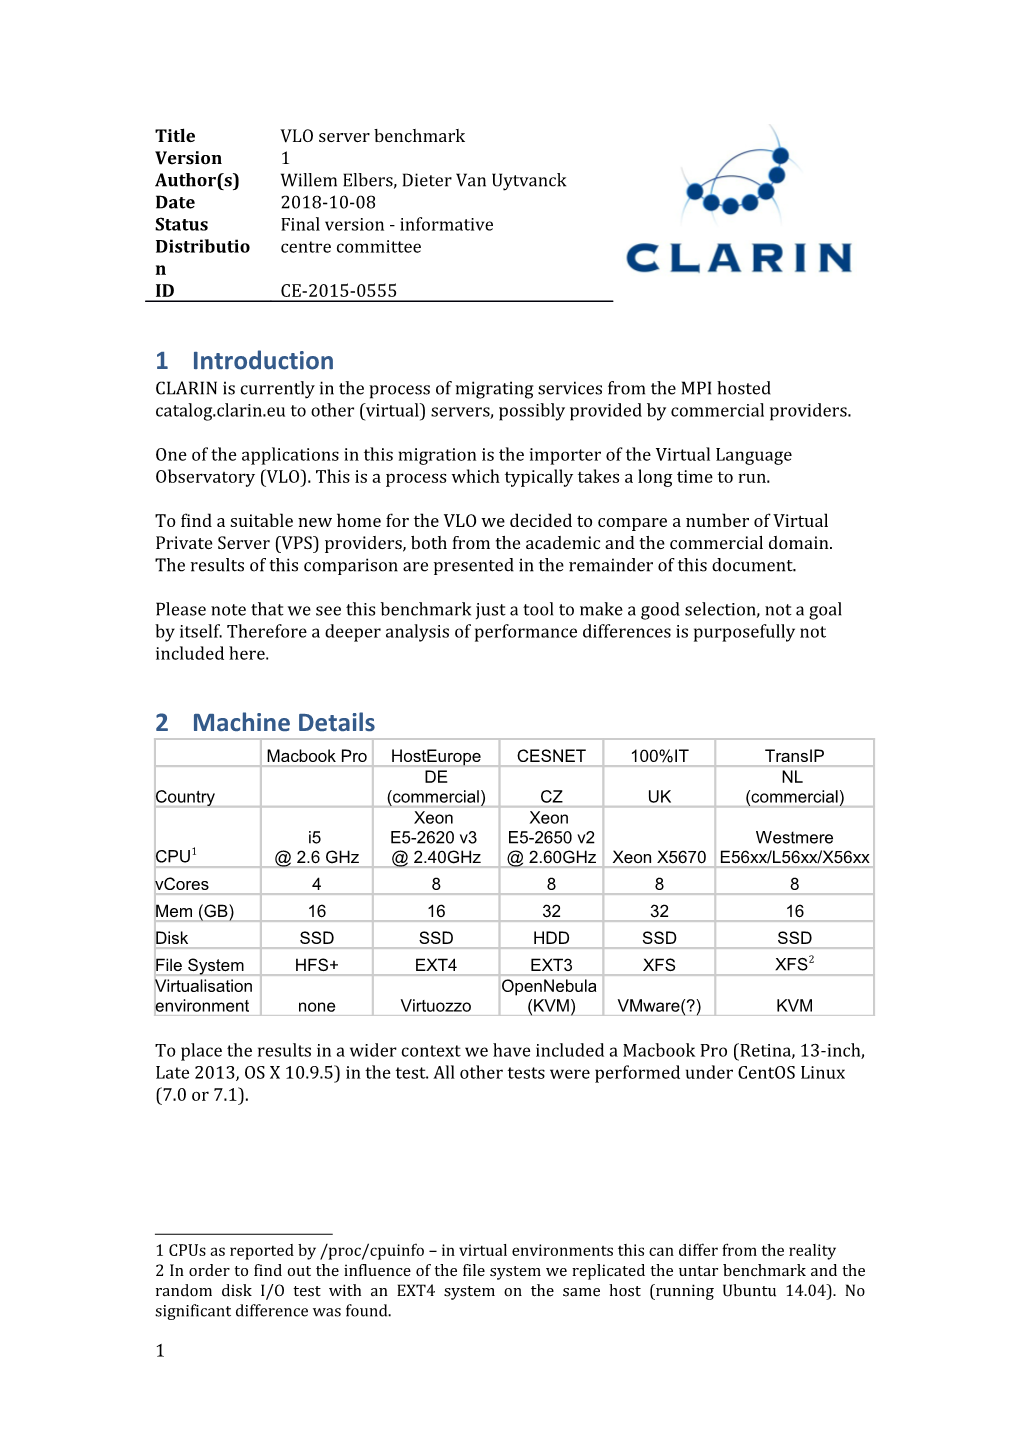 CLARIN Is Currently in the Process of Migrating Services from the MPI Hosted Catalog.Clarin.Eu